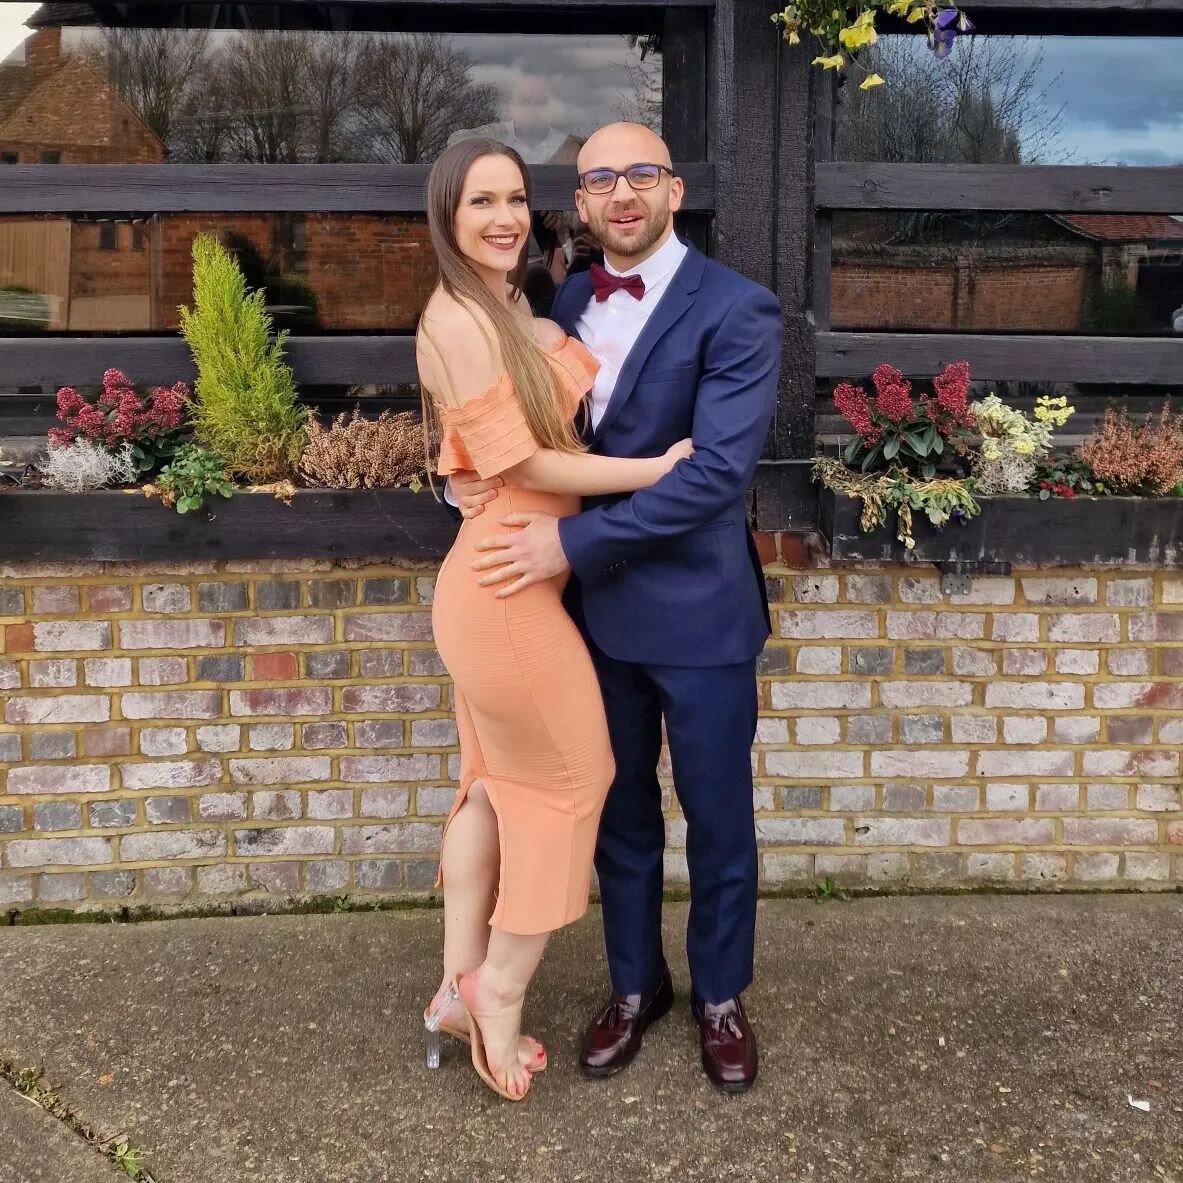 Wedding vibes 🧡
Got a half decent photo in the end 😂